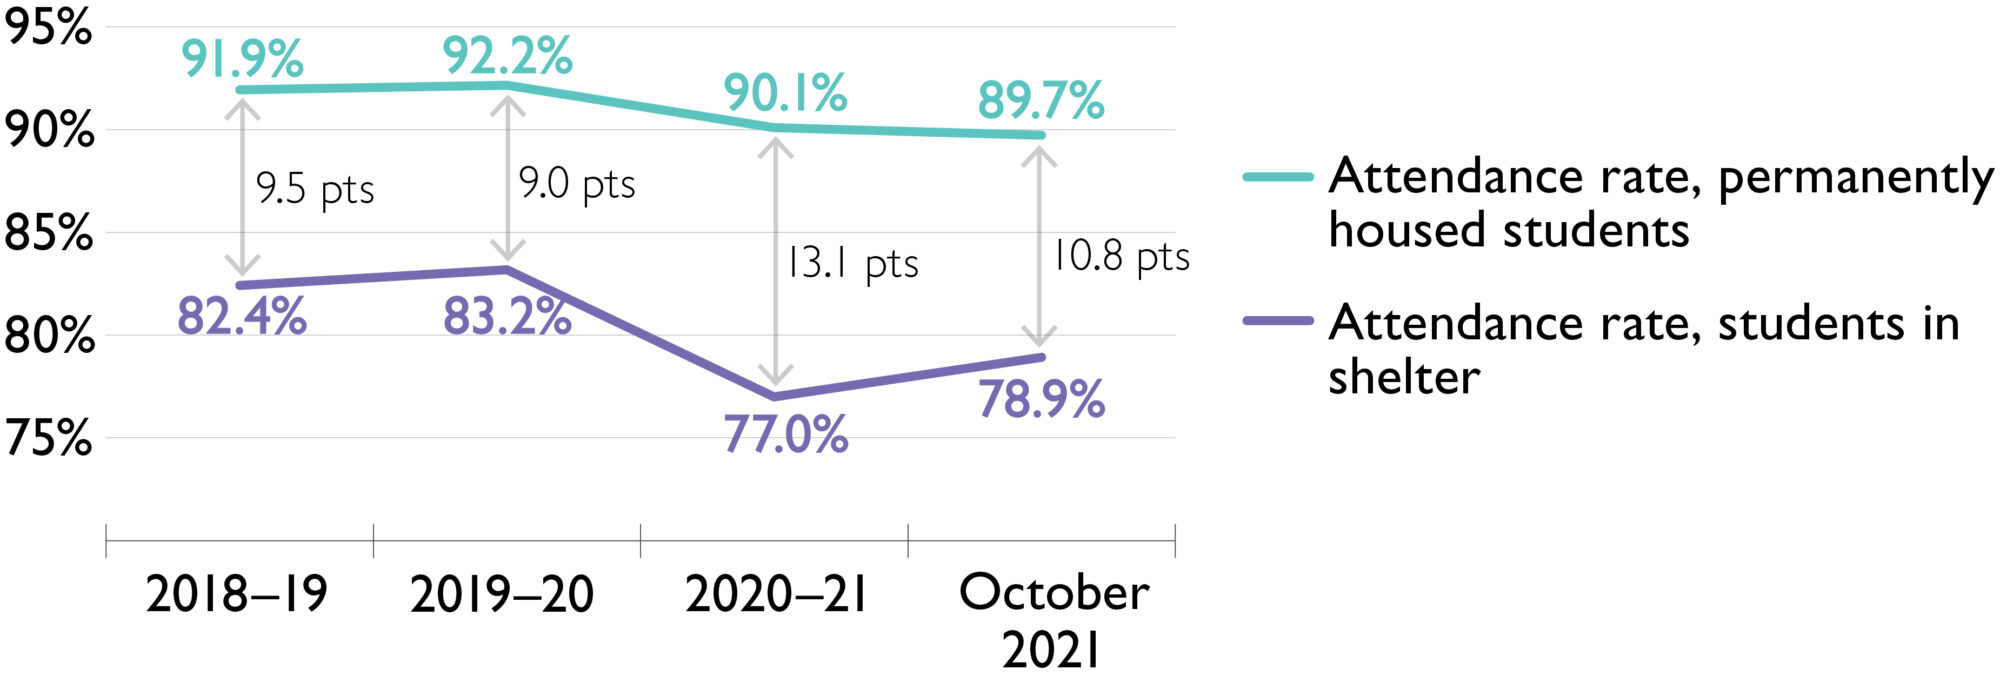 Line graph showing the 2018-19, 2019-20, 2020-21, and October 2021 attendance rates for permanently housed students and students in shelter. The gap between the lines ranges from 9 percentage points (2019-20) to 13.1 points (2020-21).